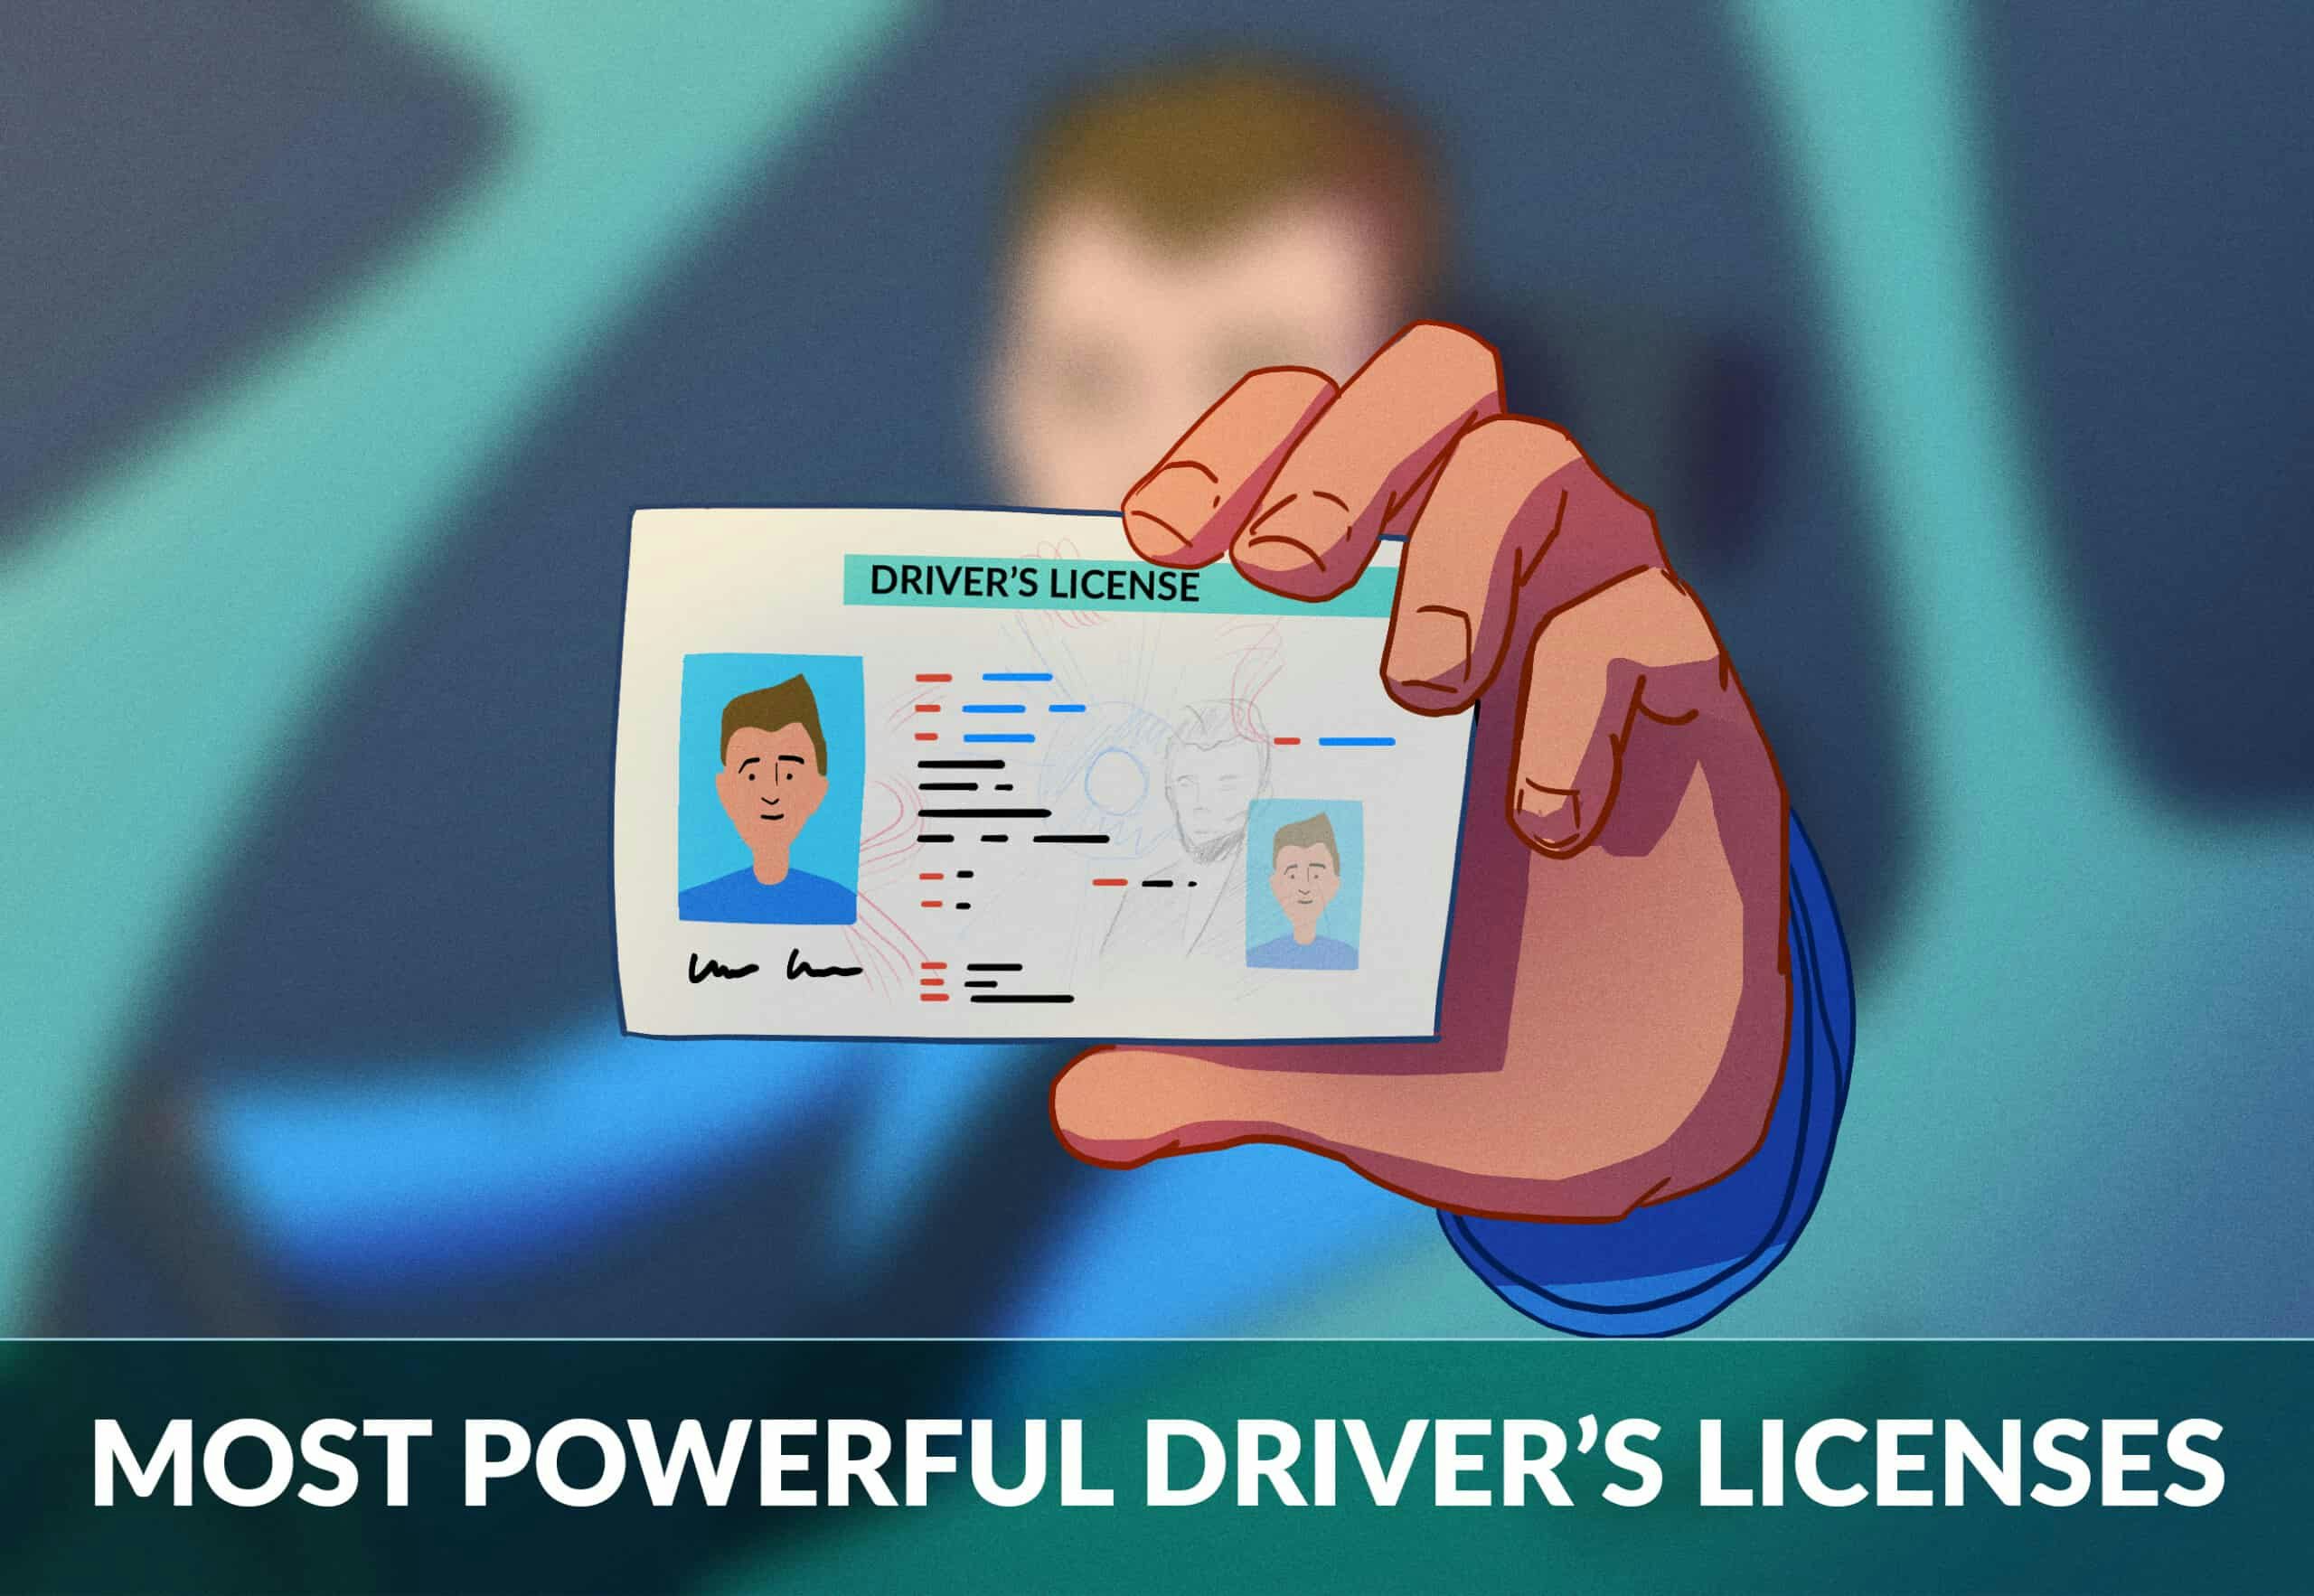 The world's most powerful drivers licenses